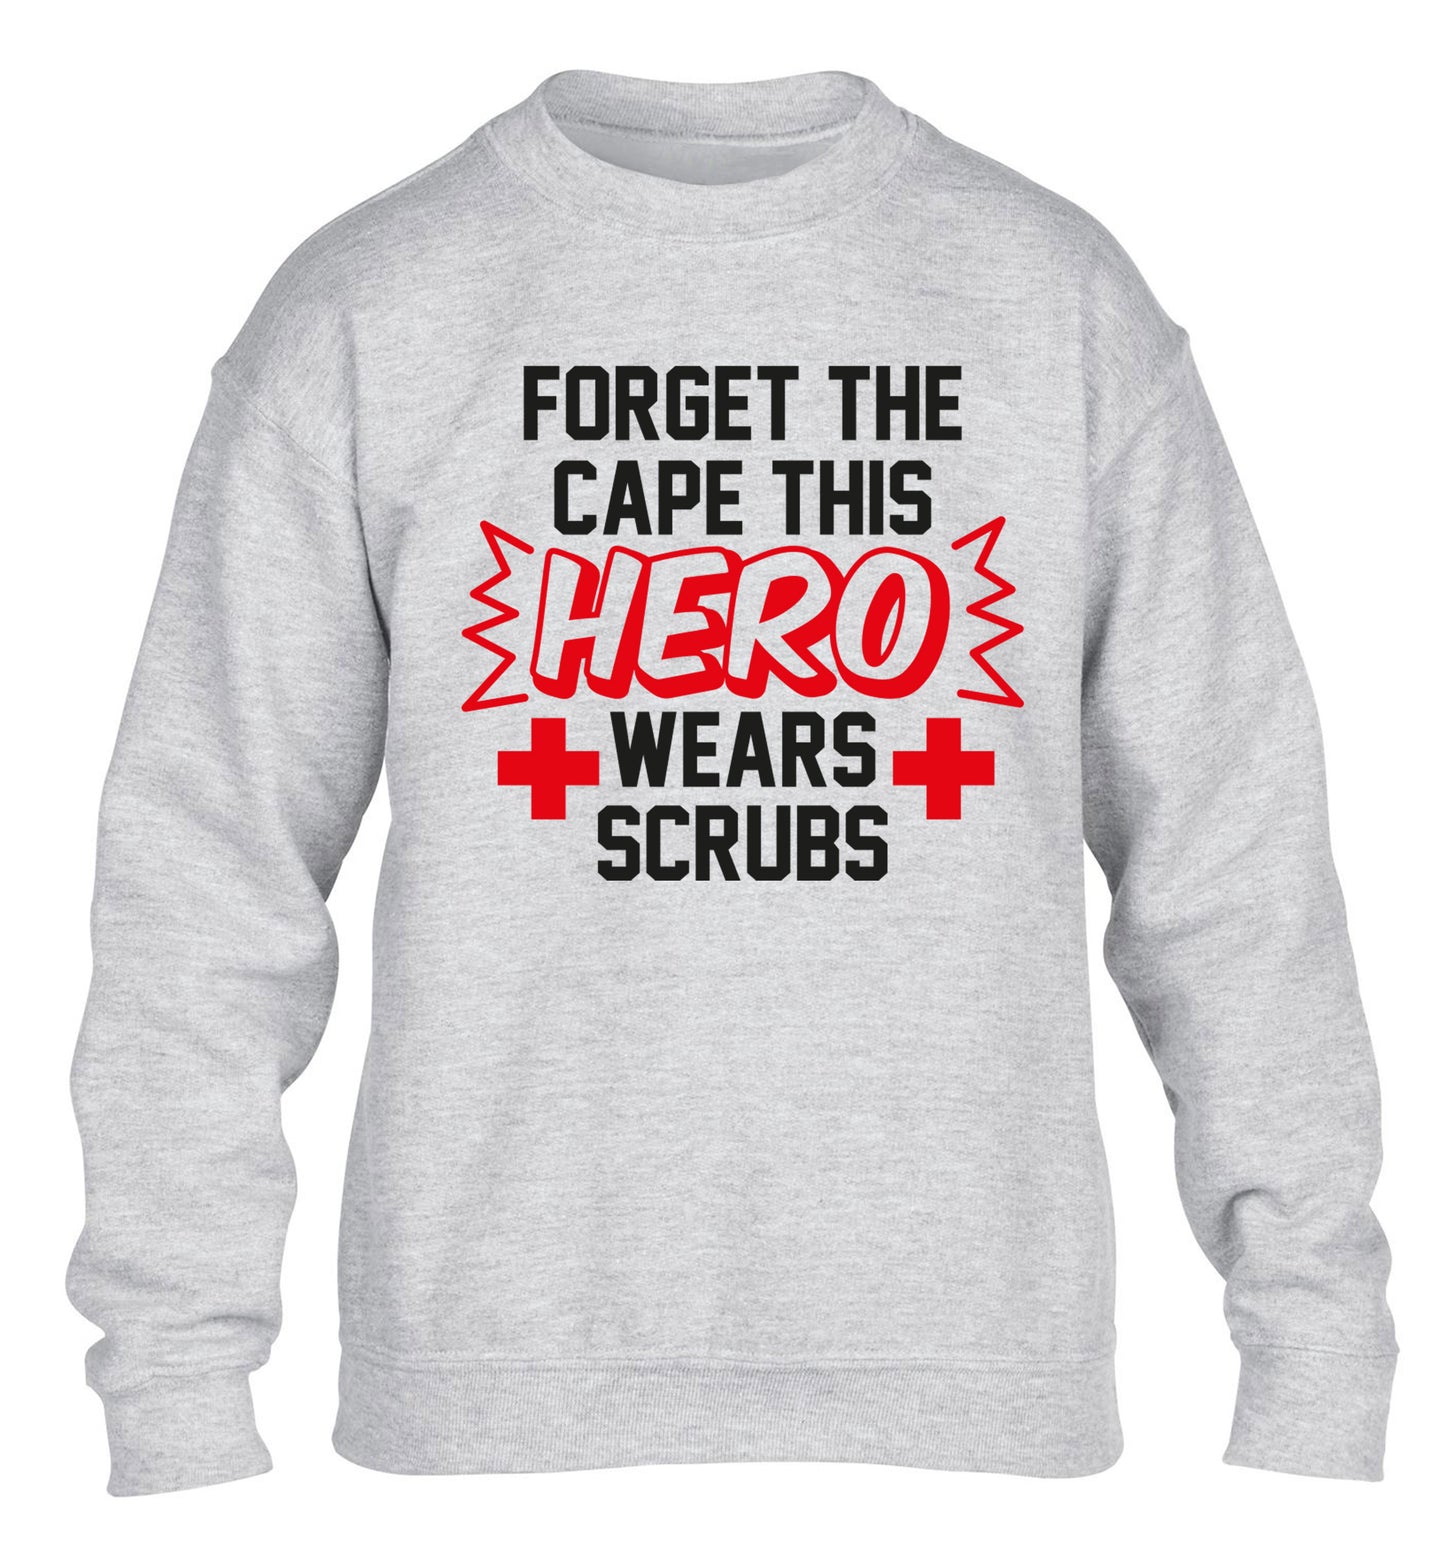 Forget the cape this hero wears scrubs children's grey sweater 12-14 Years